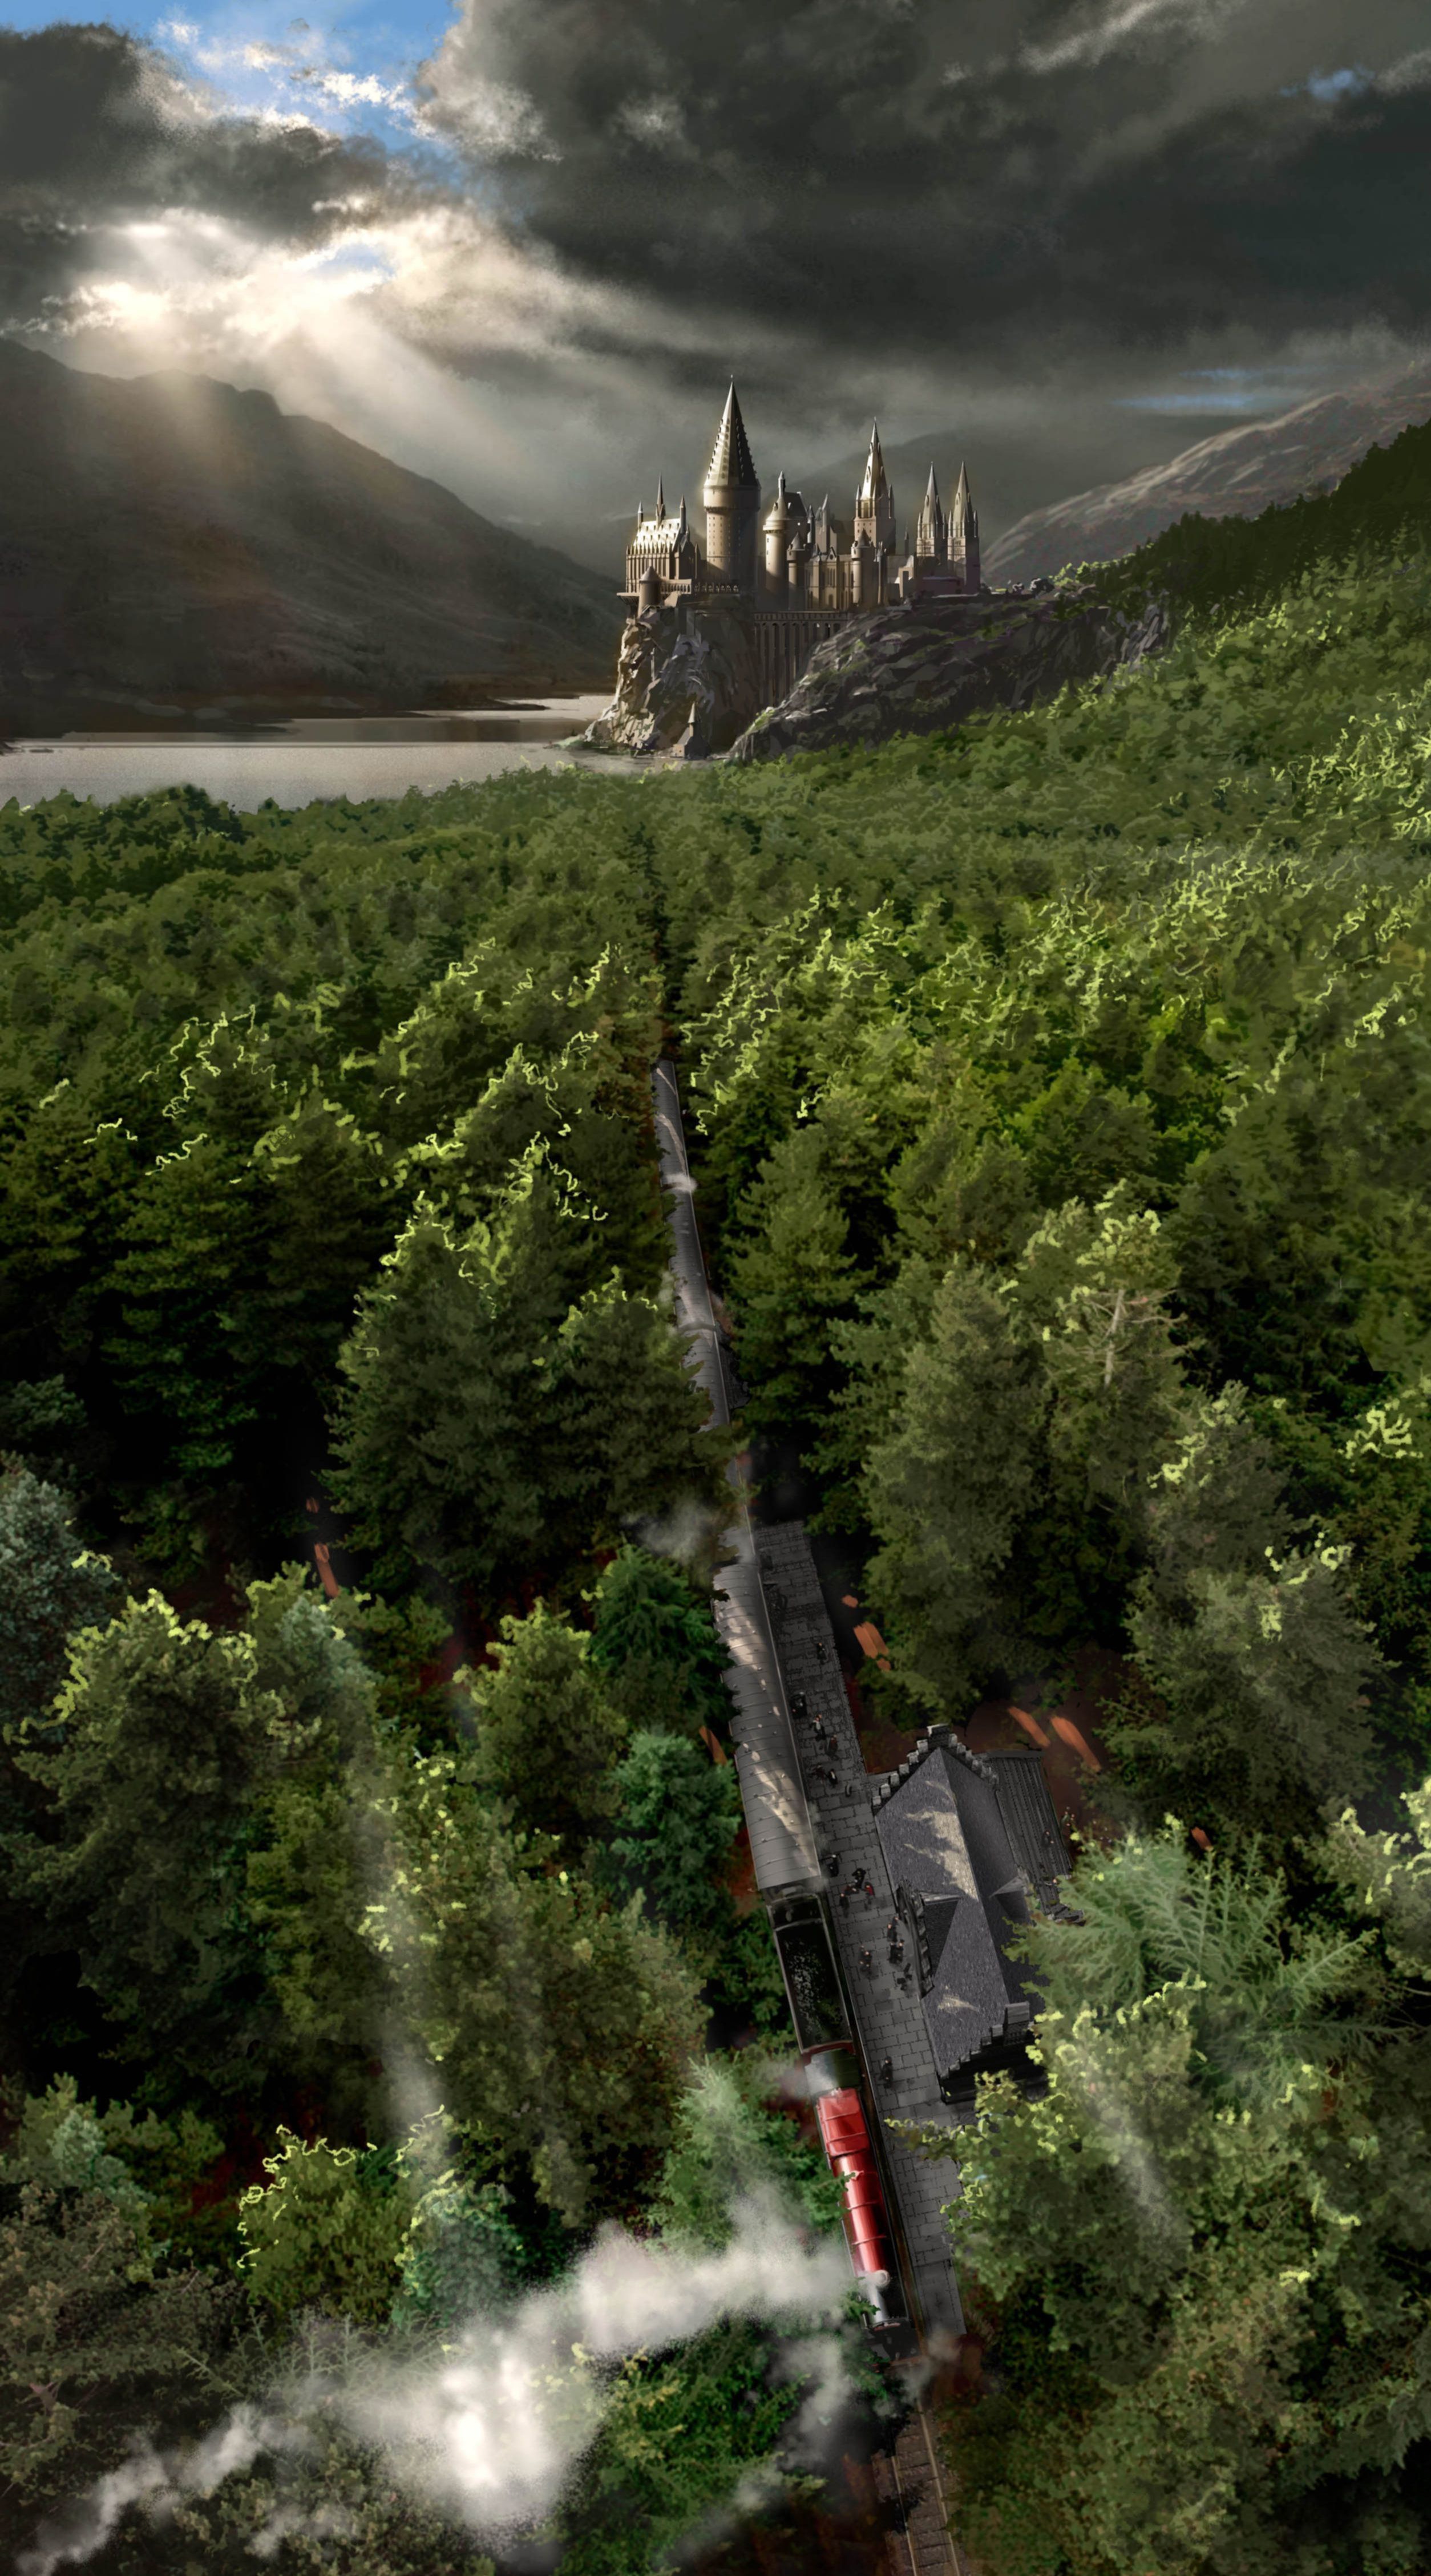 An Illustration Of Hogwarts And Hogsmeade With The Forbidden